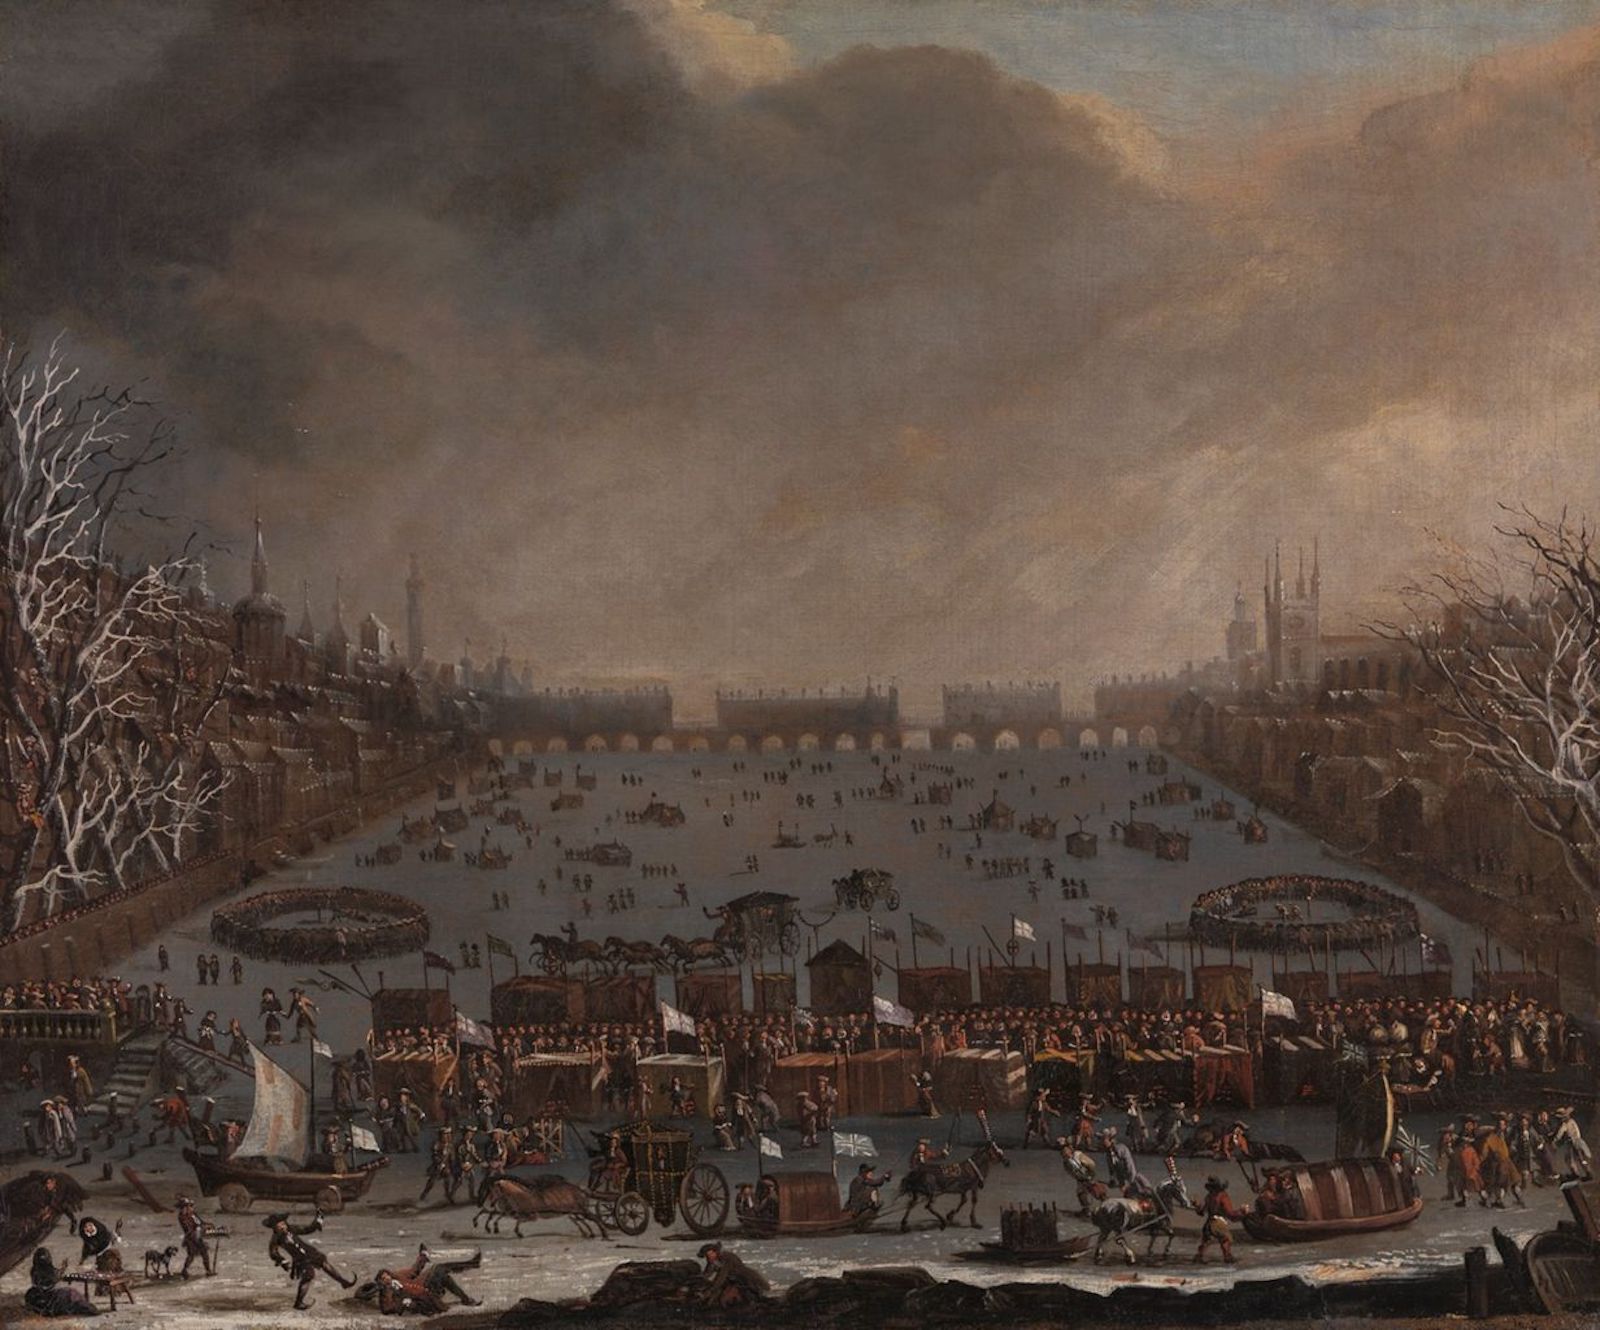 Frost Fair on the Thames, with Old London Bridge in the distance, unknown artist, c. 1684. Yale Center for British Art, Paul Mellon Collection. Public Domain.